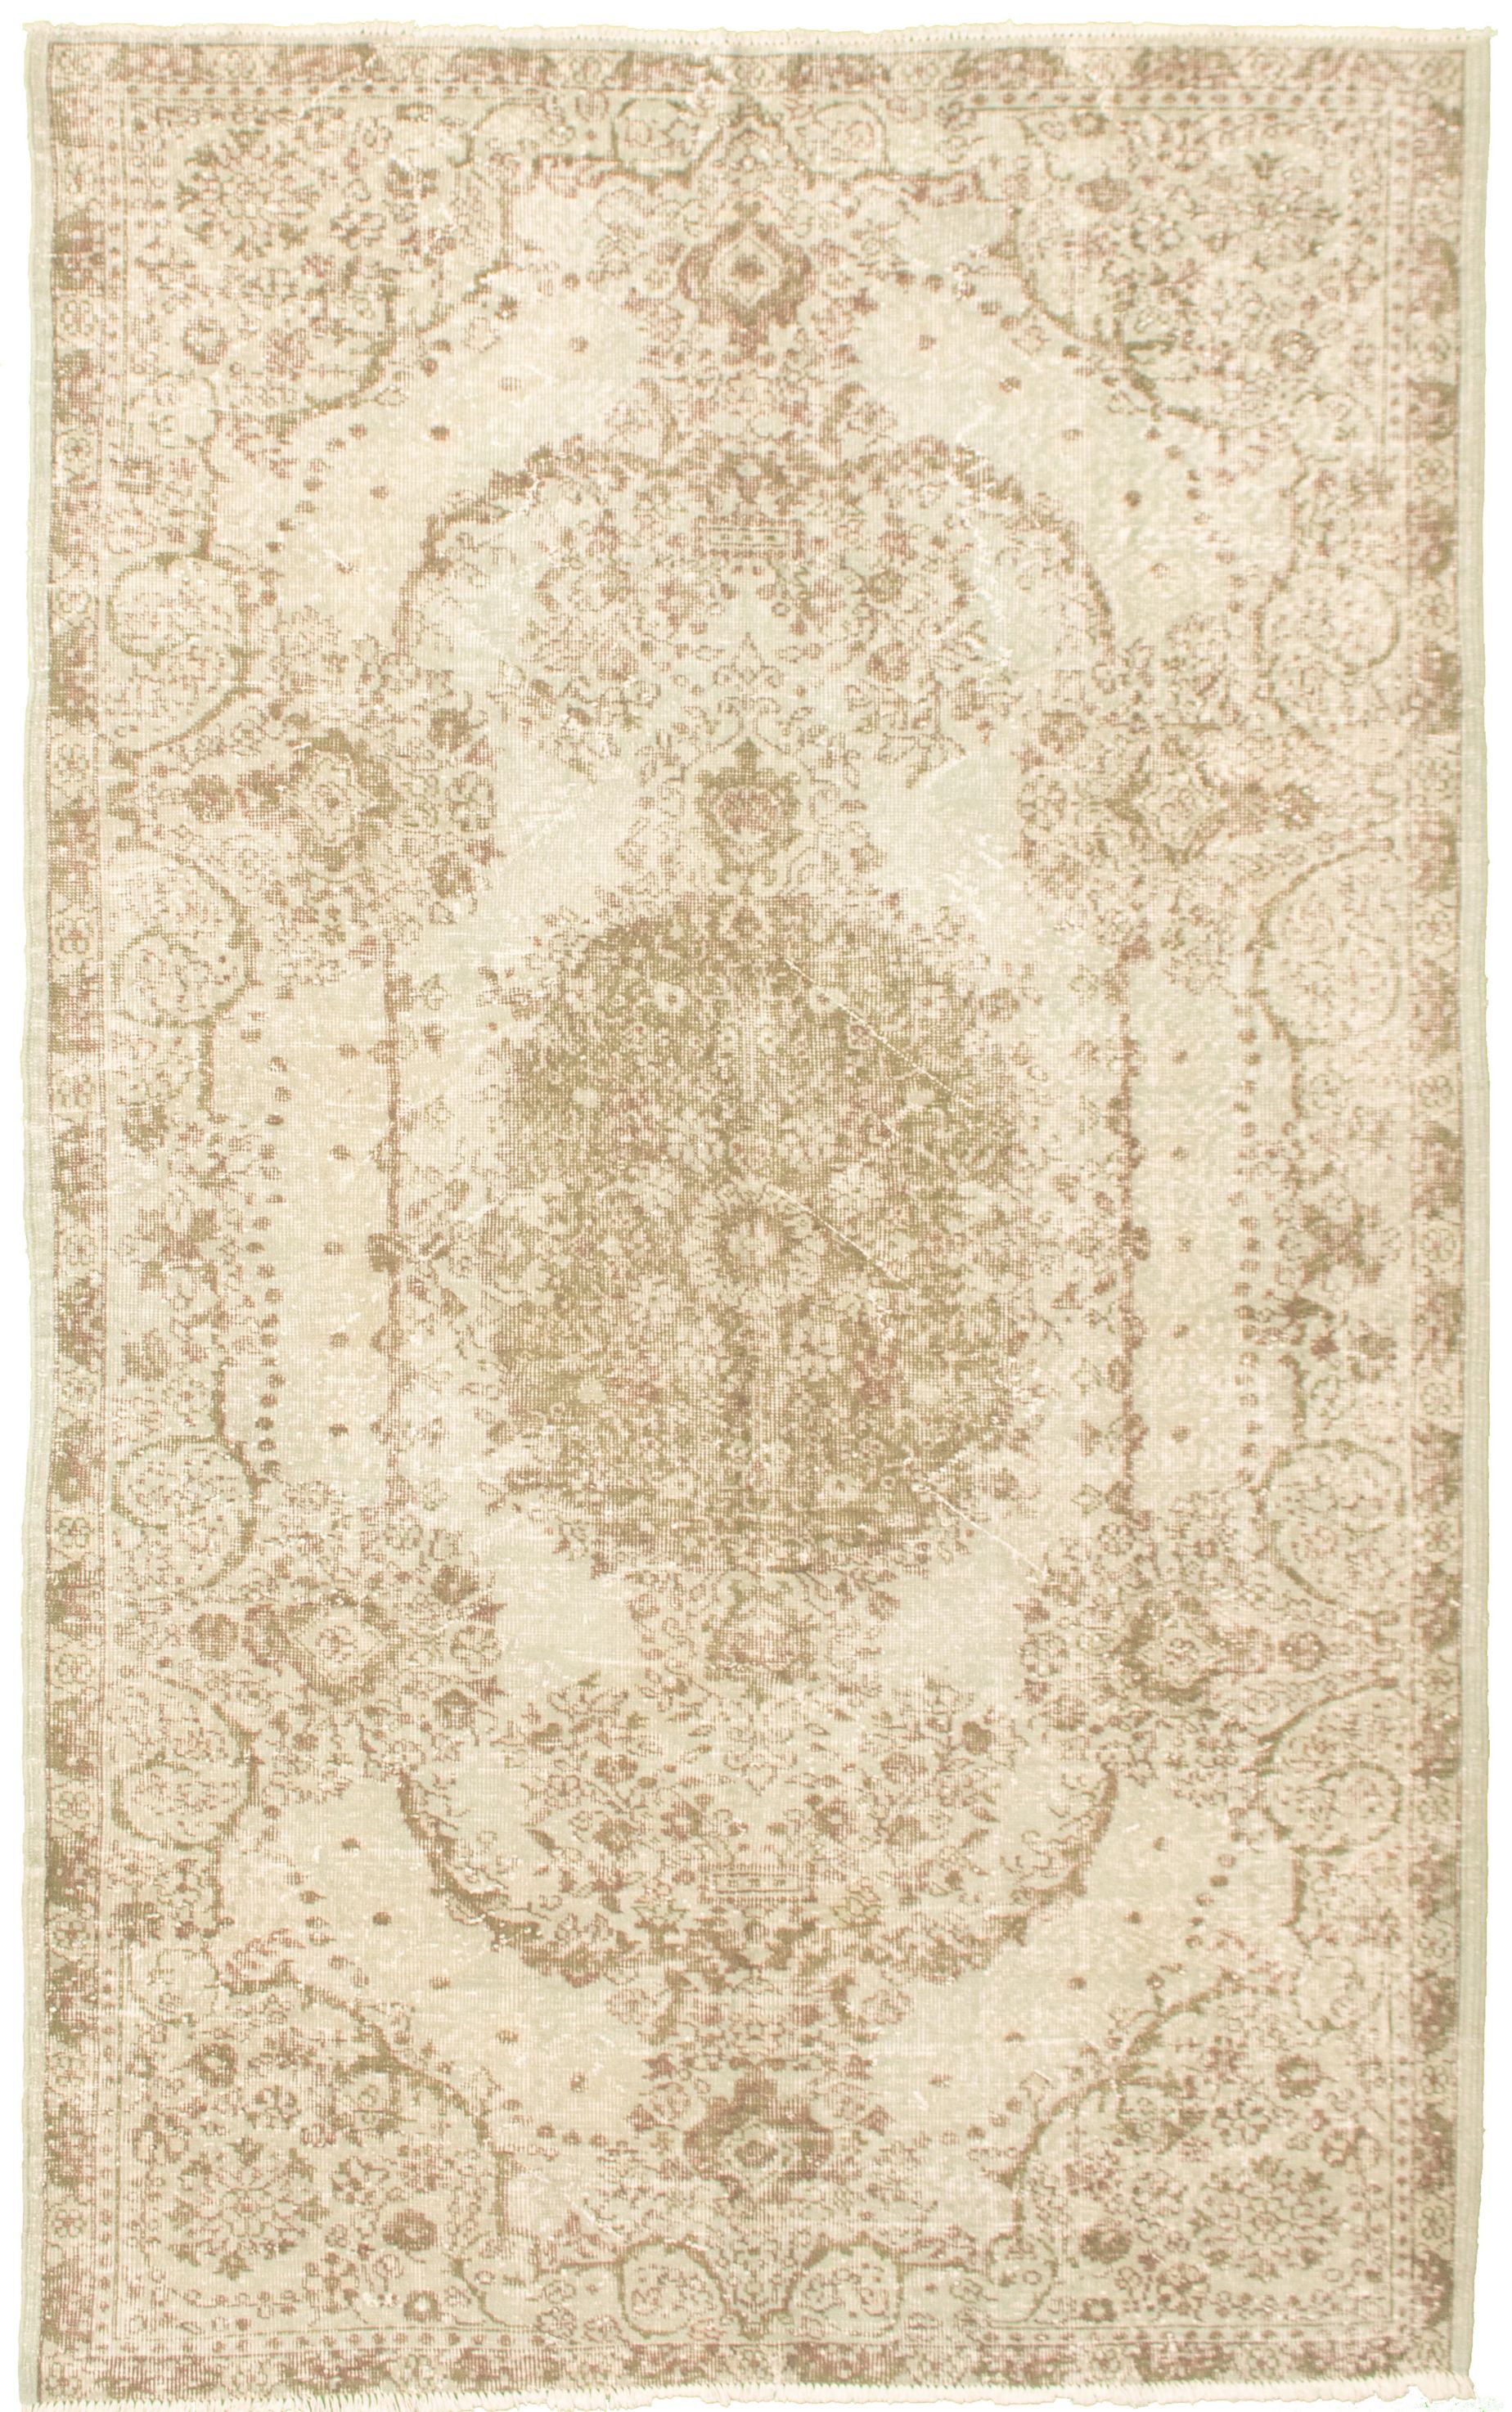 Hand-knotted Antalya Vintage Light Green Wool Rug 5'11" x 9'8"  Size: 5'11" x 9'8"  